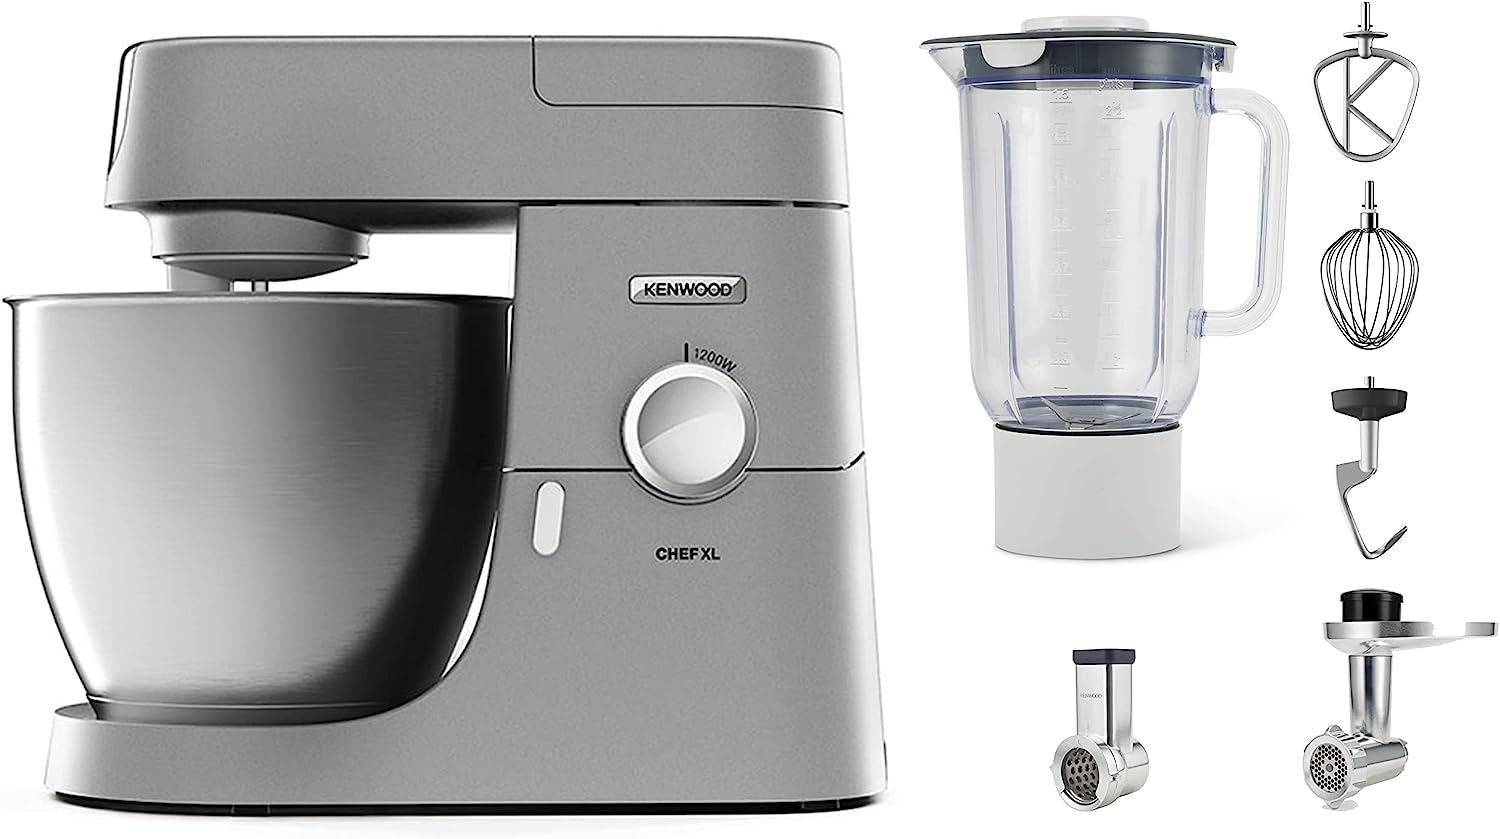 Kenwood Chef XL KVL4220S FOOD Processor with Extensive Accessories, 6.7 L Stainless Steel Mixing Bowl, 1.5 L Glass Mixing Attachment, Meat Grinder, Drum Raffle, 3-Piece Patisserie Set, 1200 Watt, Silver